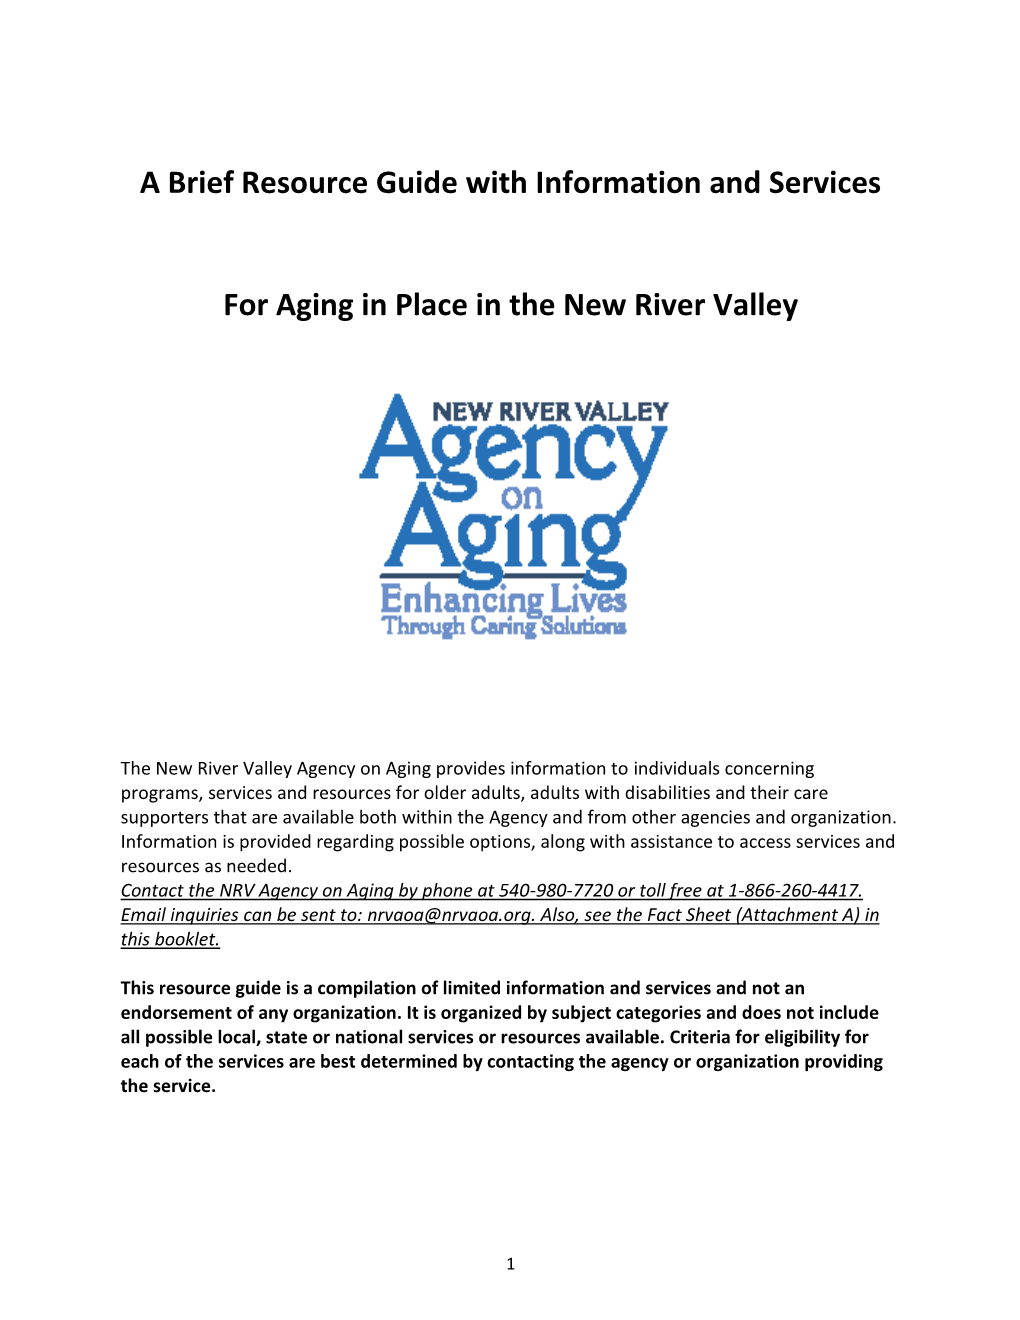 A Brief Resource Guide with Information and Services for Aging